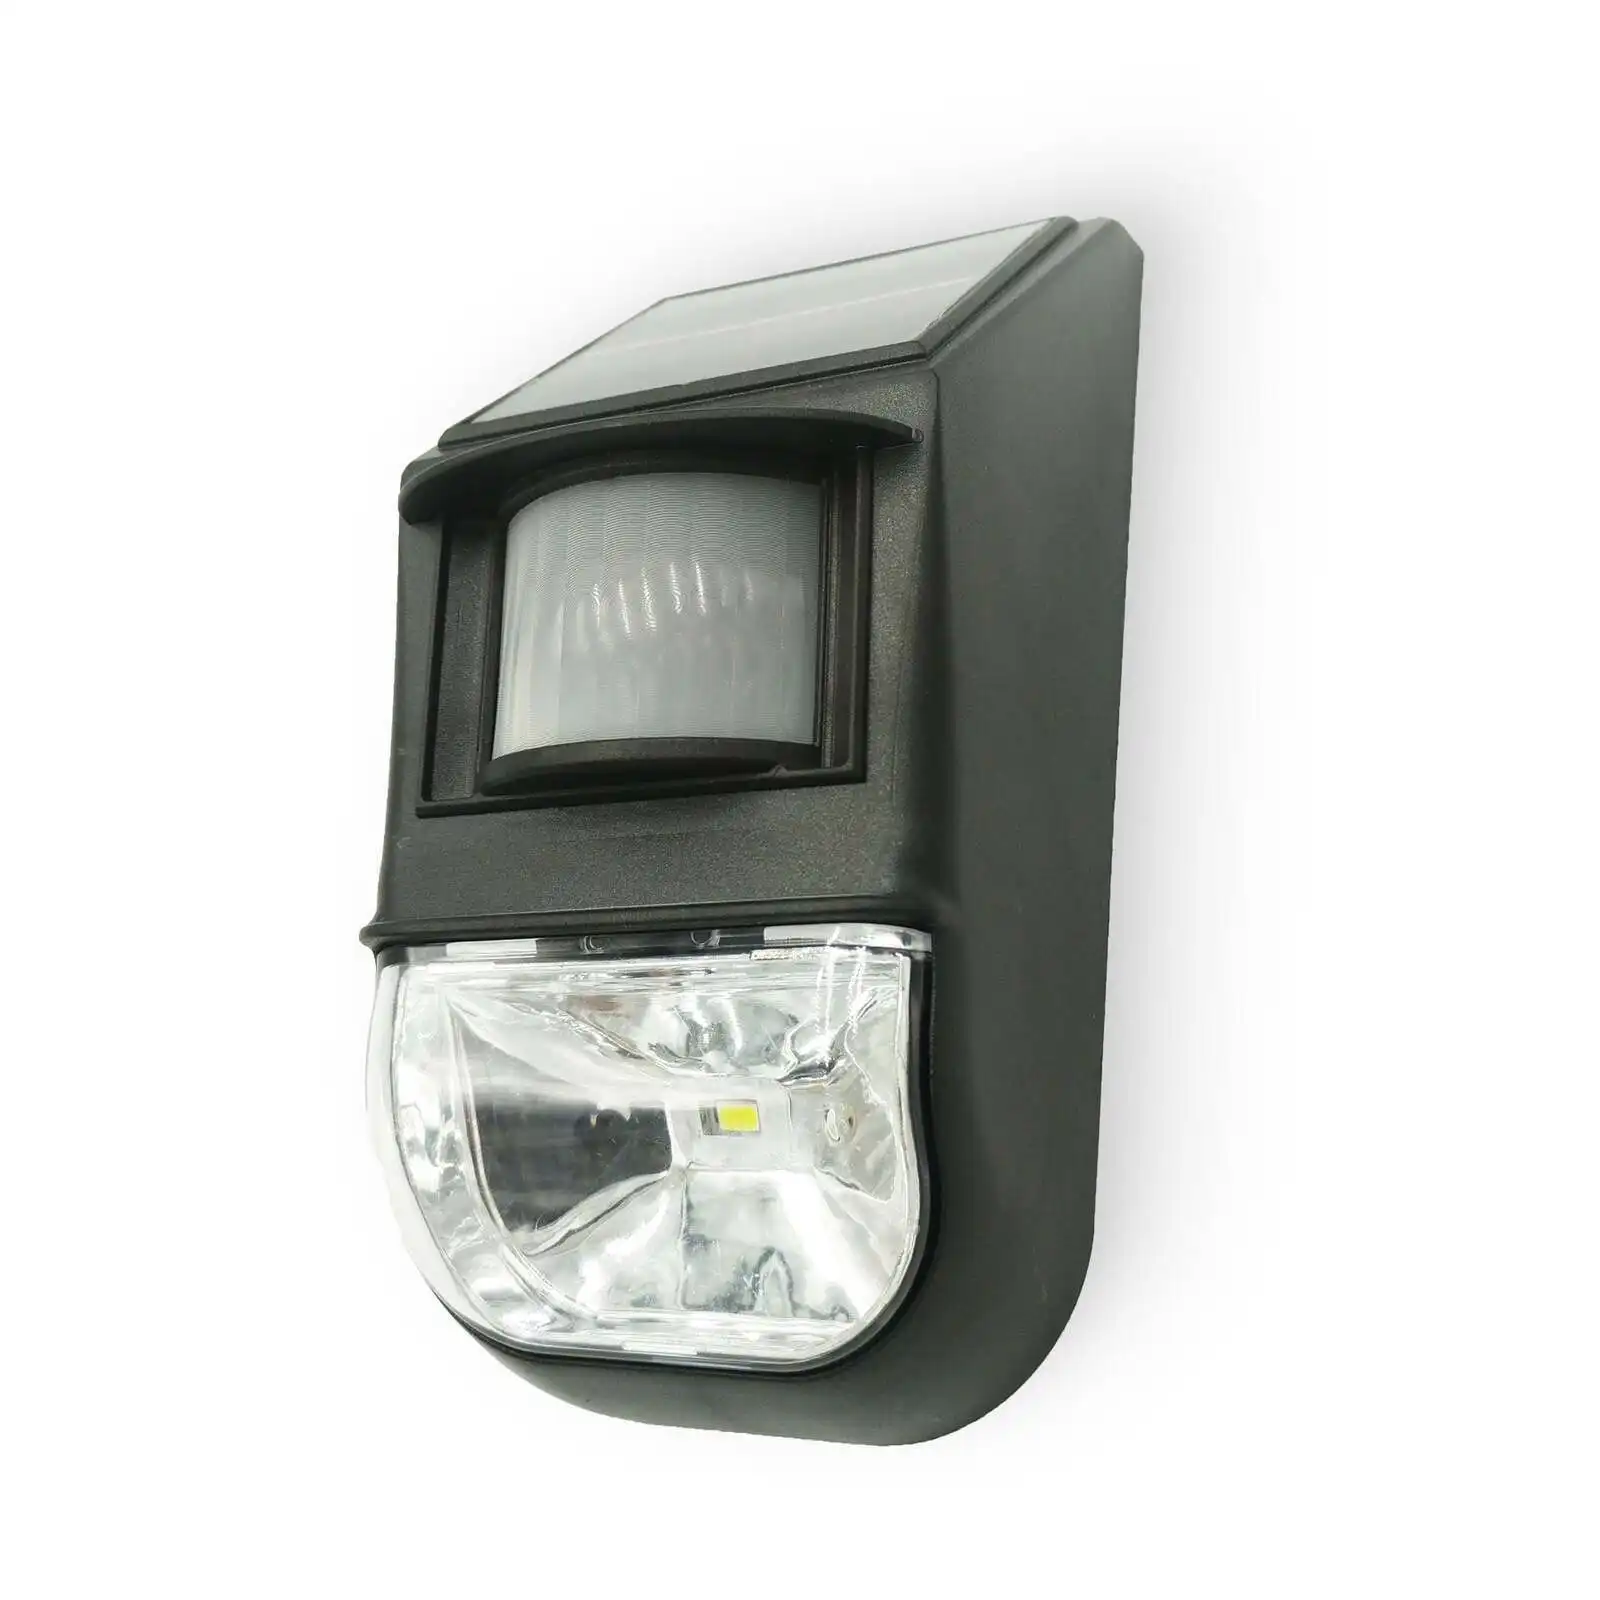 Solar-Powered Motion Sensor Light (1-Piece), Detects Motion, Rechargeable